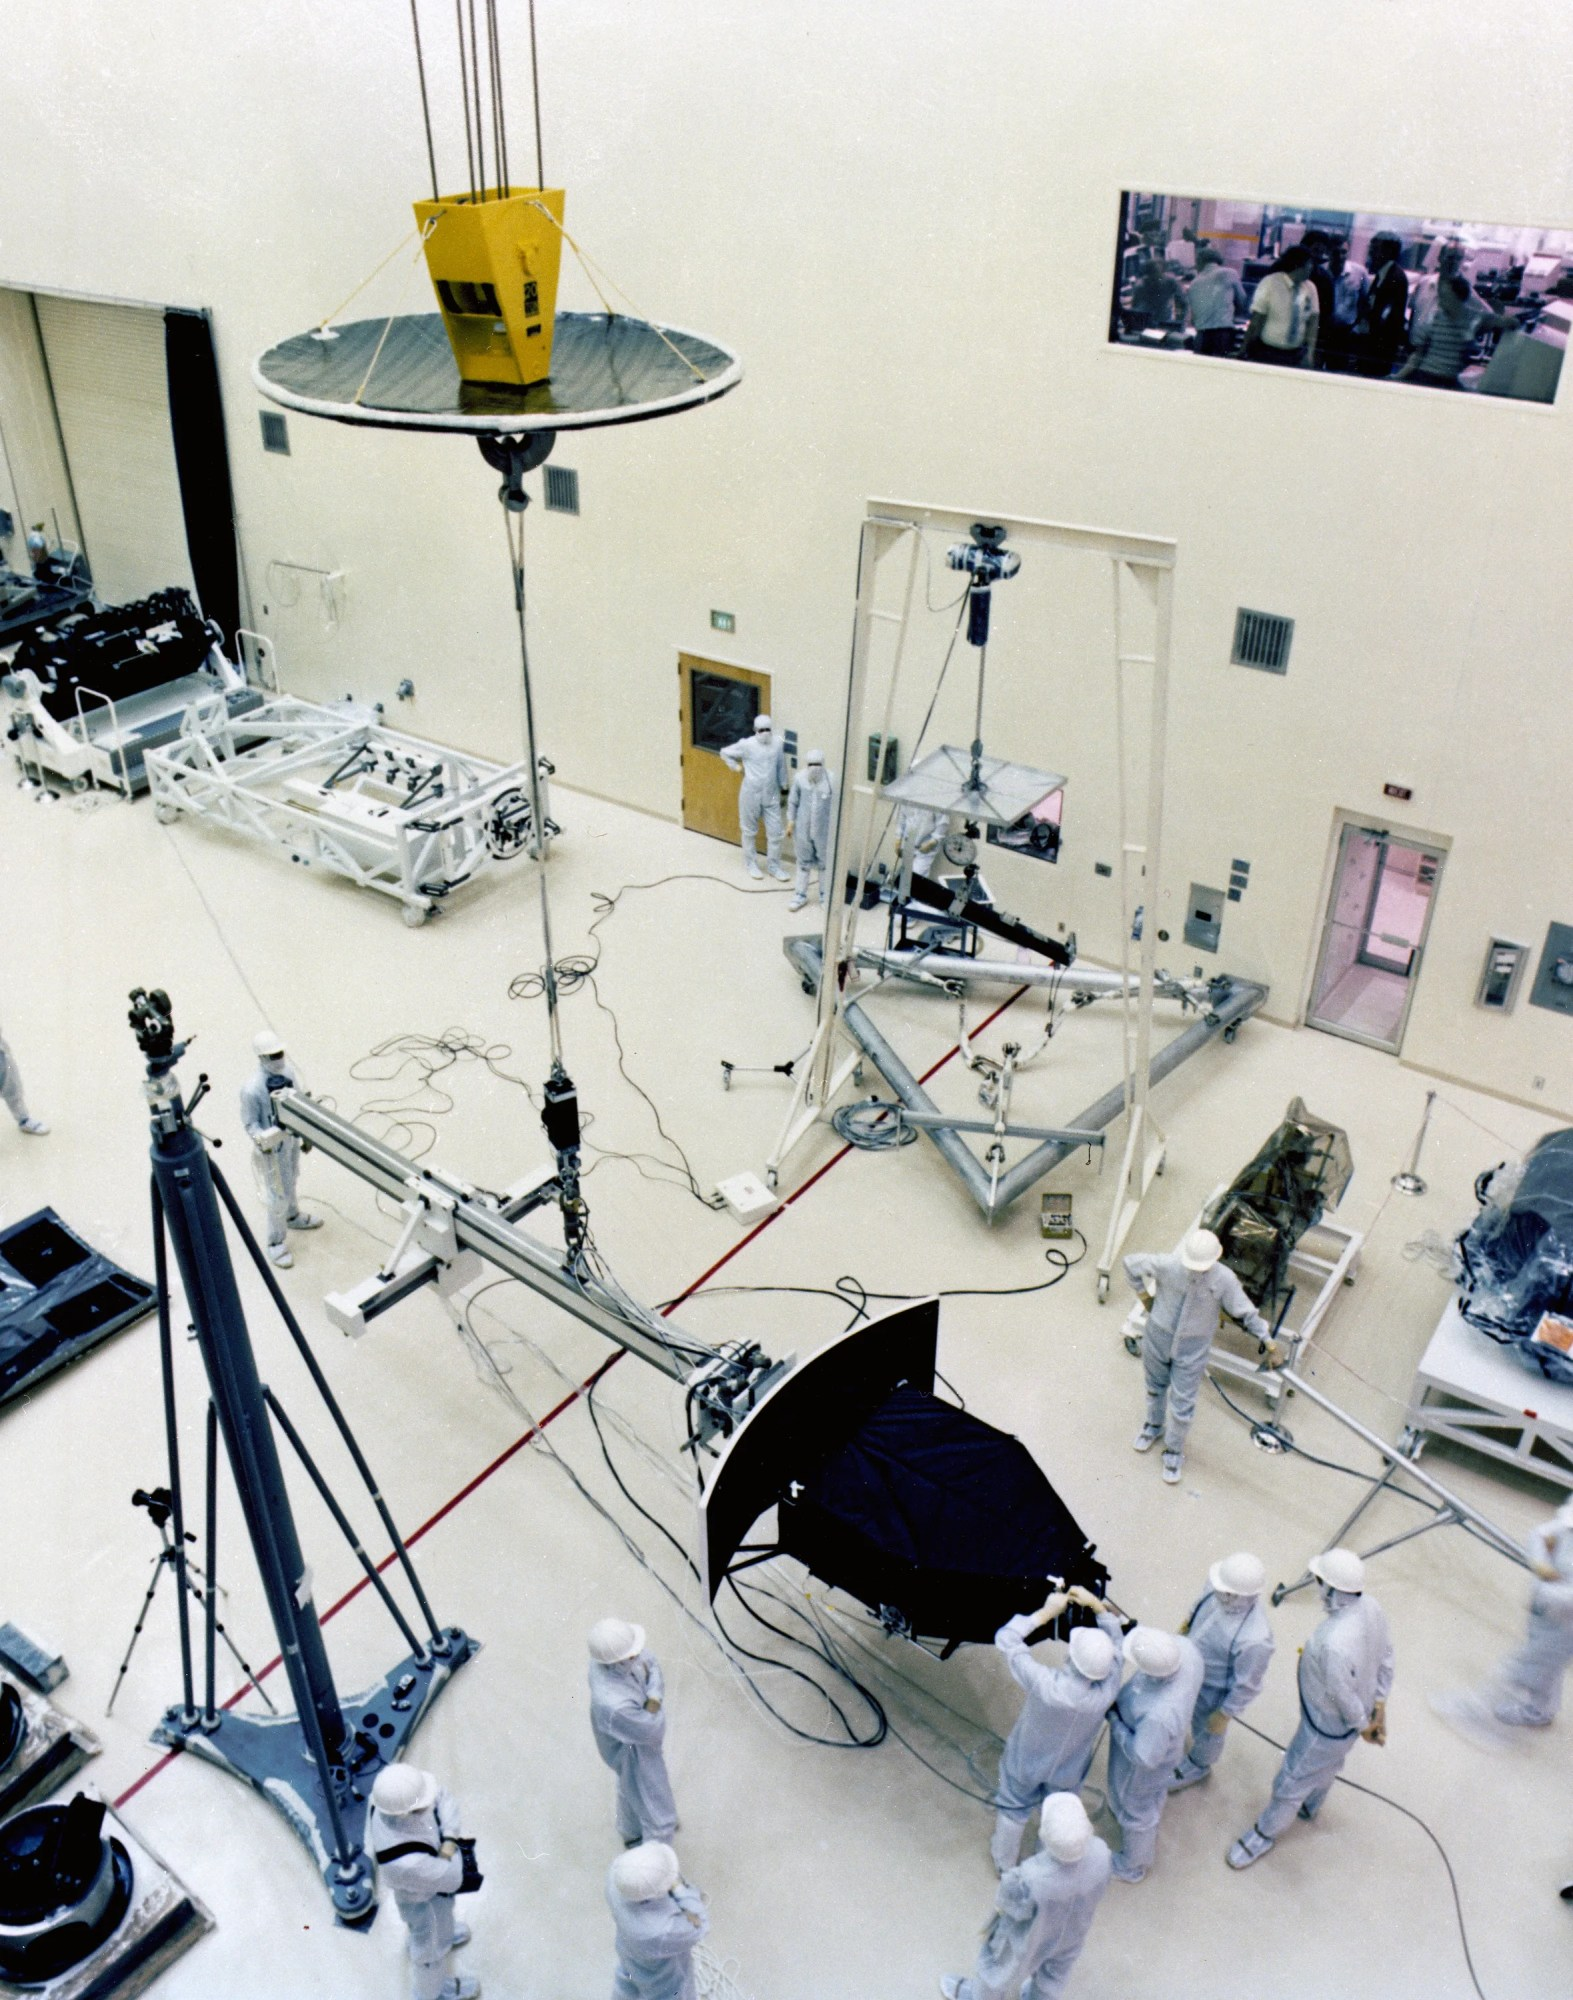 A group of white-clad and helmeted workers are seen from above as they work on Hubble’s Wide Field and Planetary Camera in a clean room.